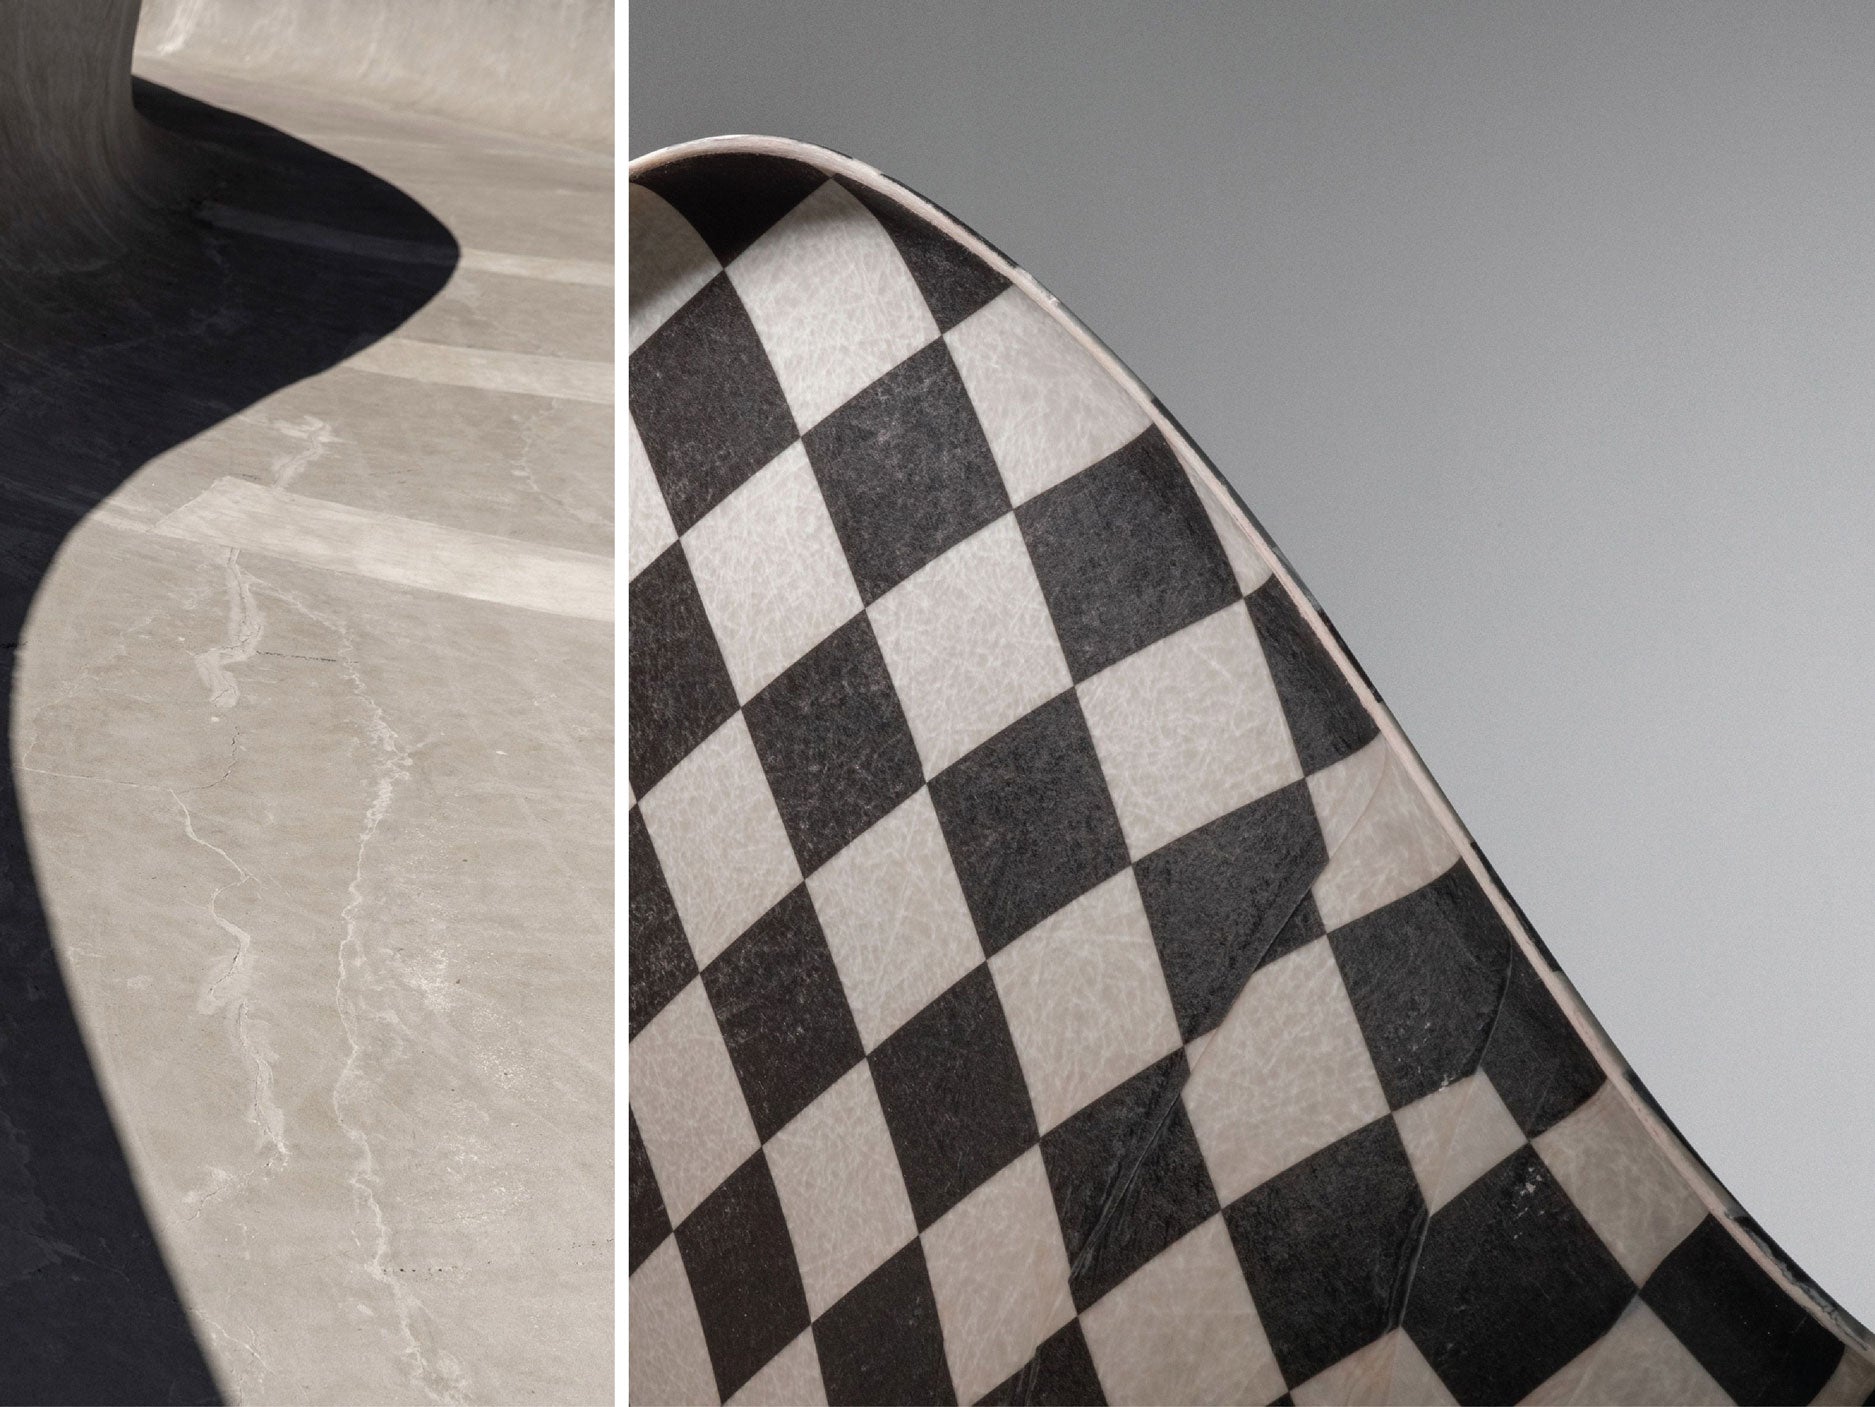 Vault by Vans Partners with Modernica at Crossover